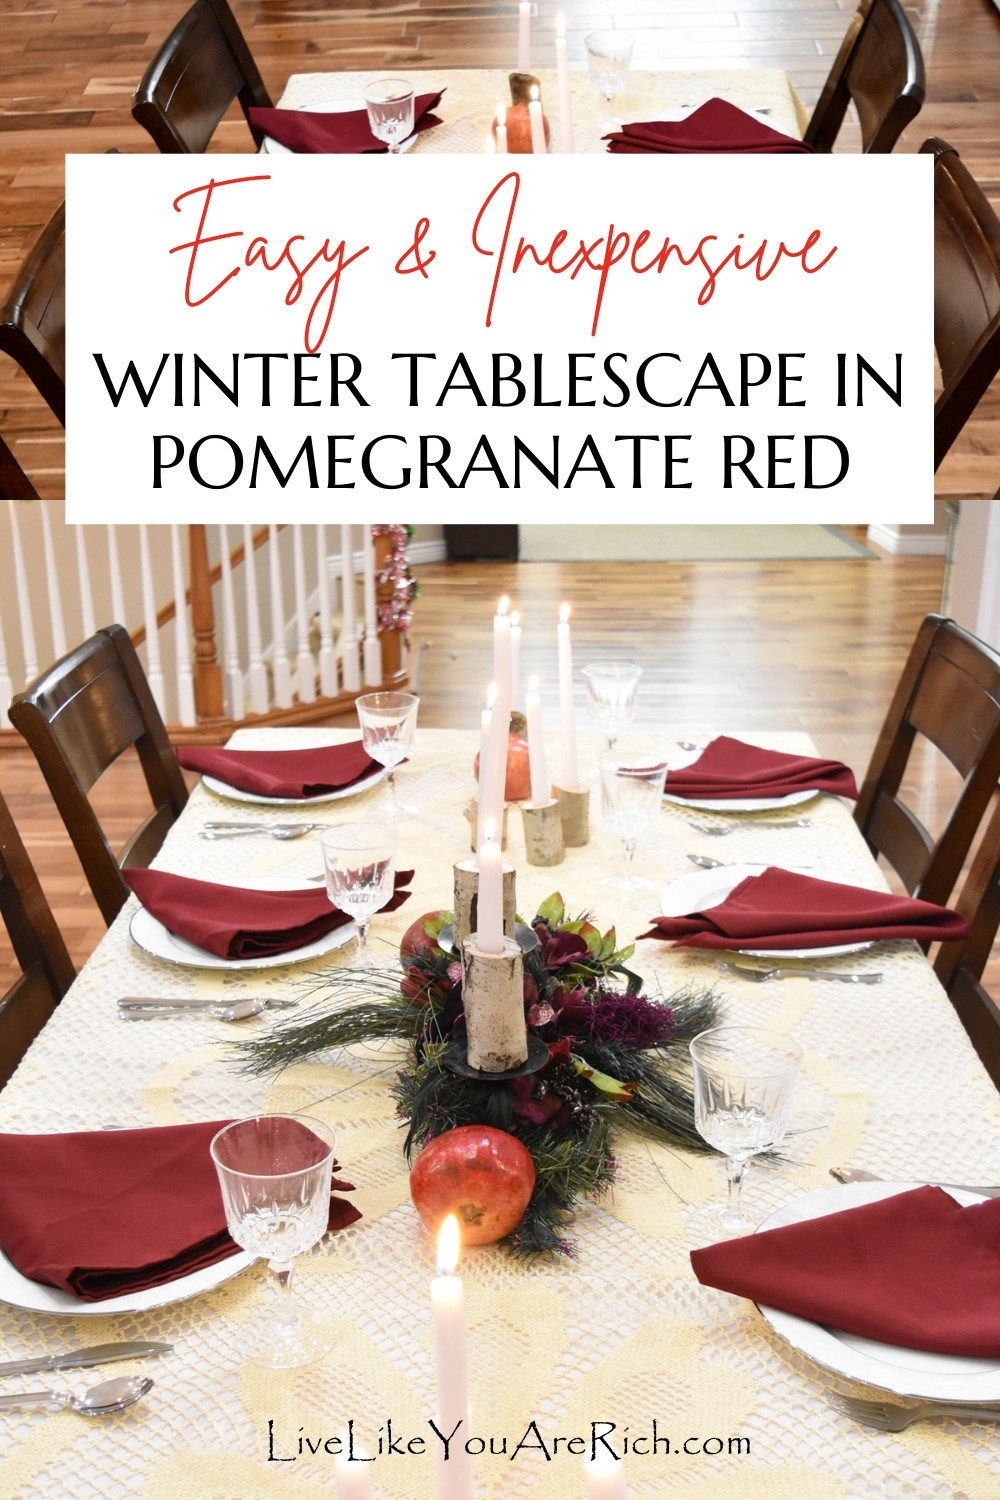 This Winter Pomegranate Red Tablescape was very simple, easy, and inexpensive to put together.